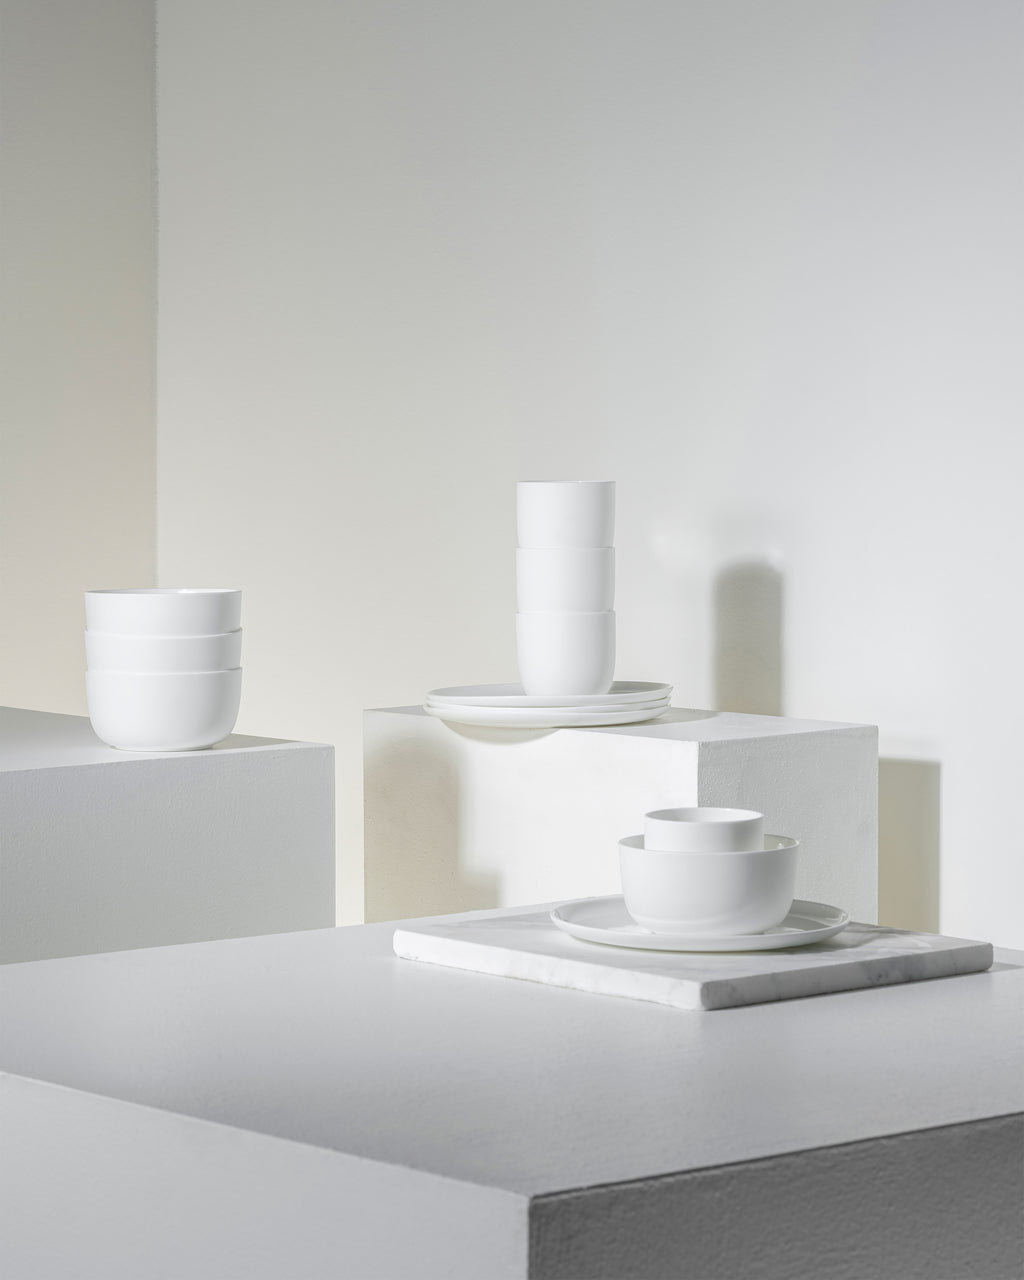 Breakfast 12 pieces - Set Base tableware by Piet Boon - white